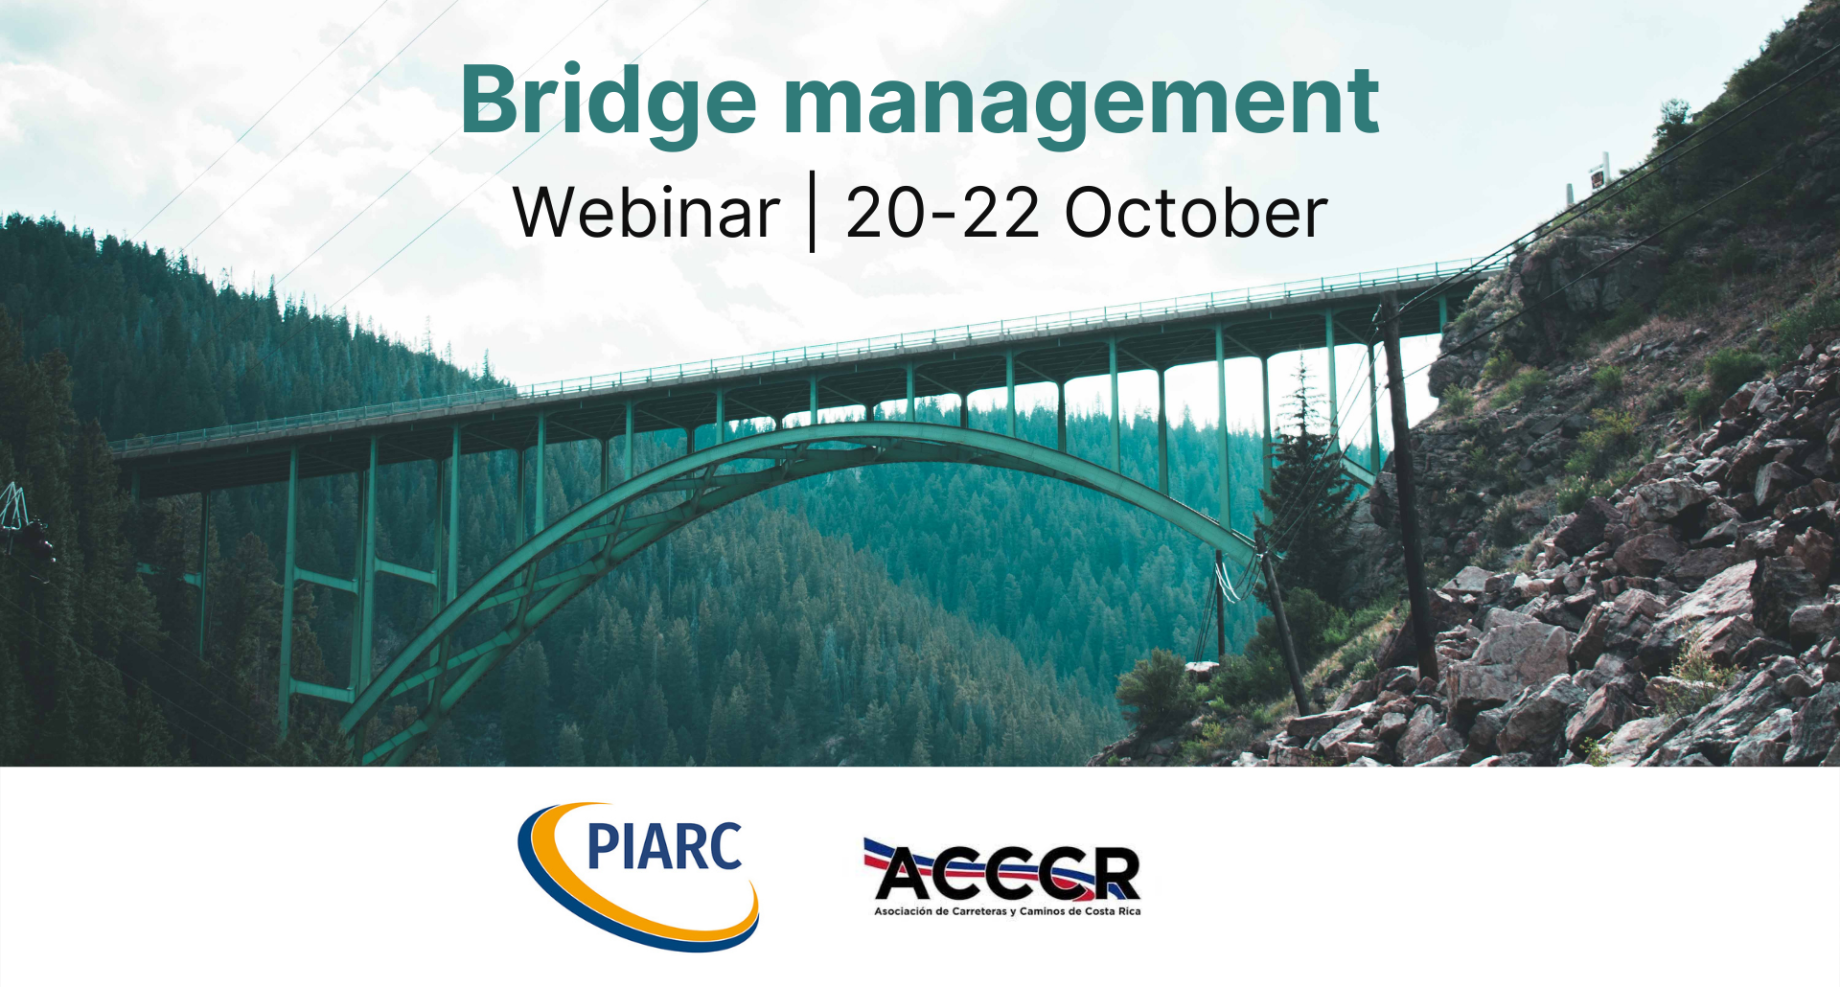 The importance of bridge maintenance, a key element of road networks, will be the focus of the "1st International Seminar on Bridge Management"